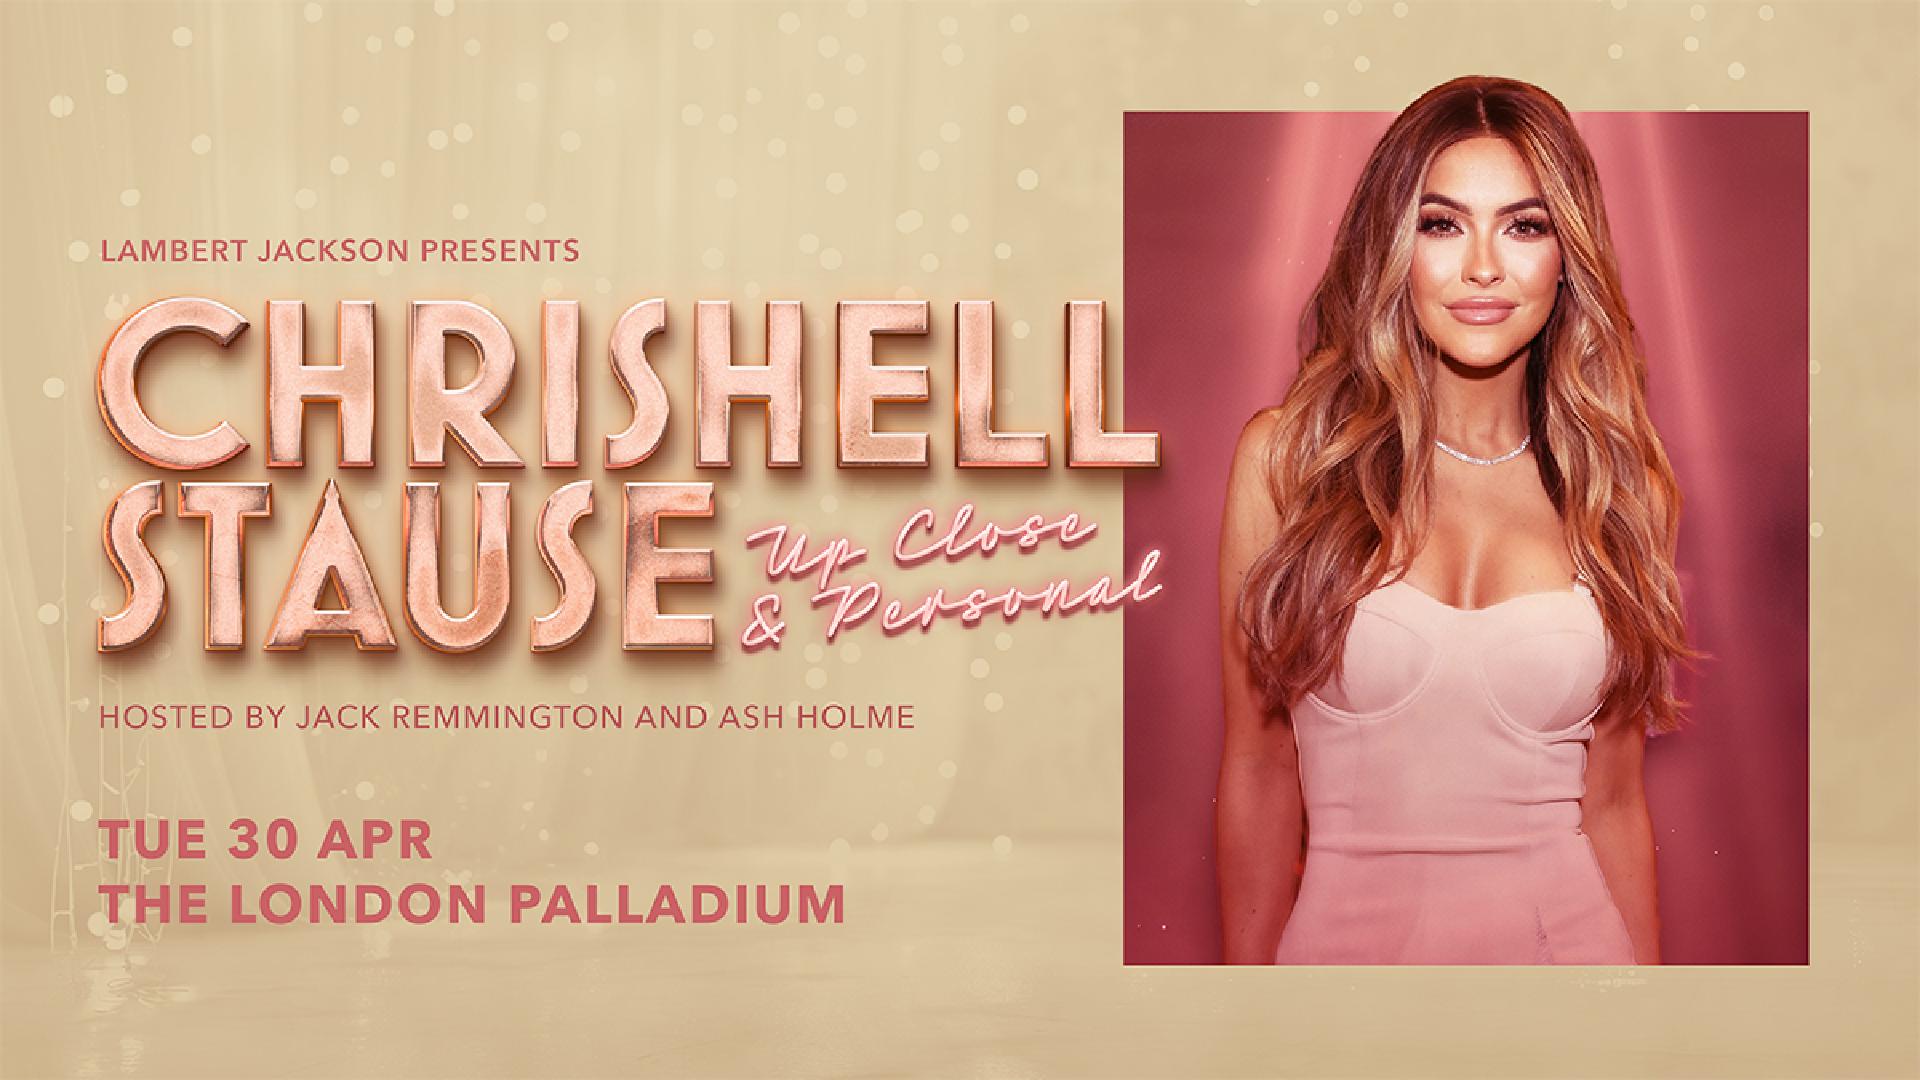 Chrishell Stause: Up Close and Personal<br>Tickets from £15